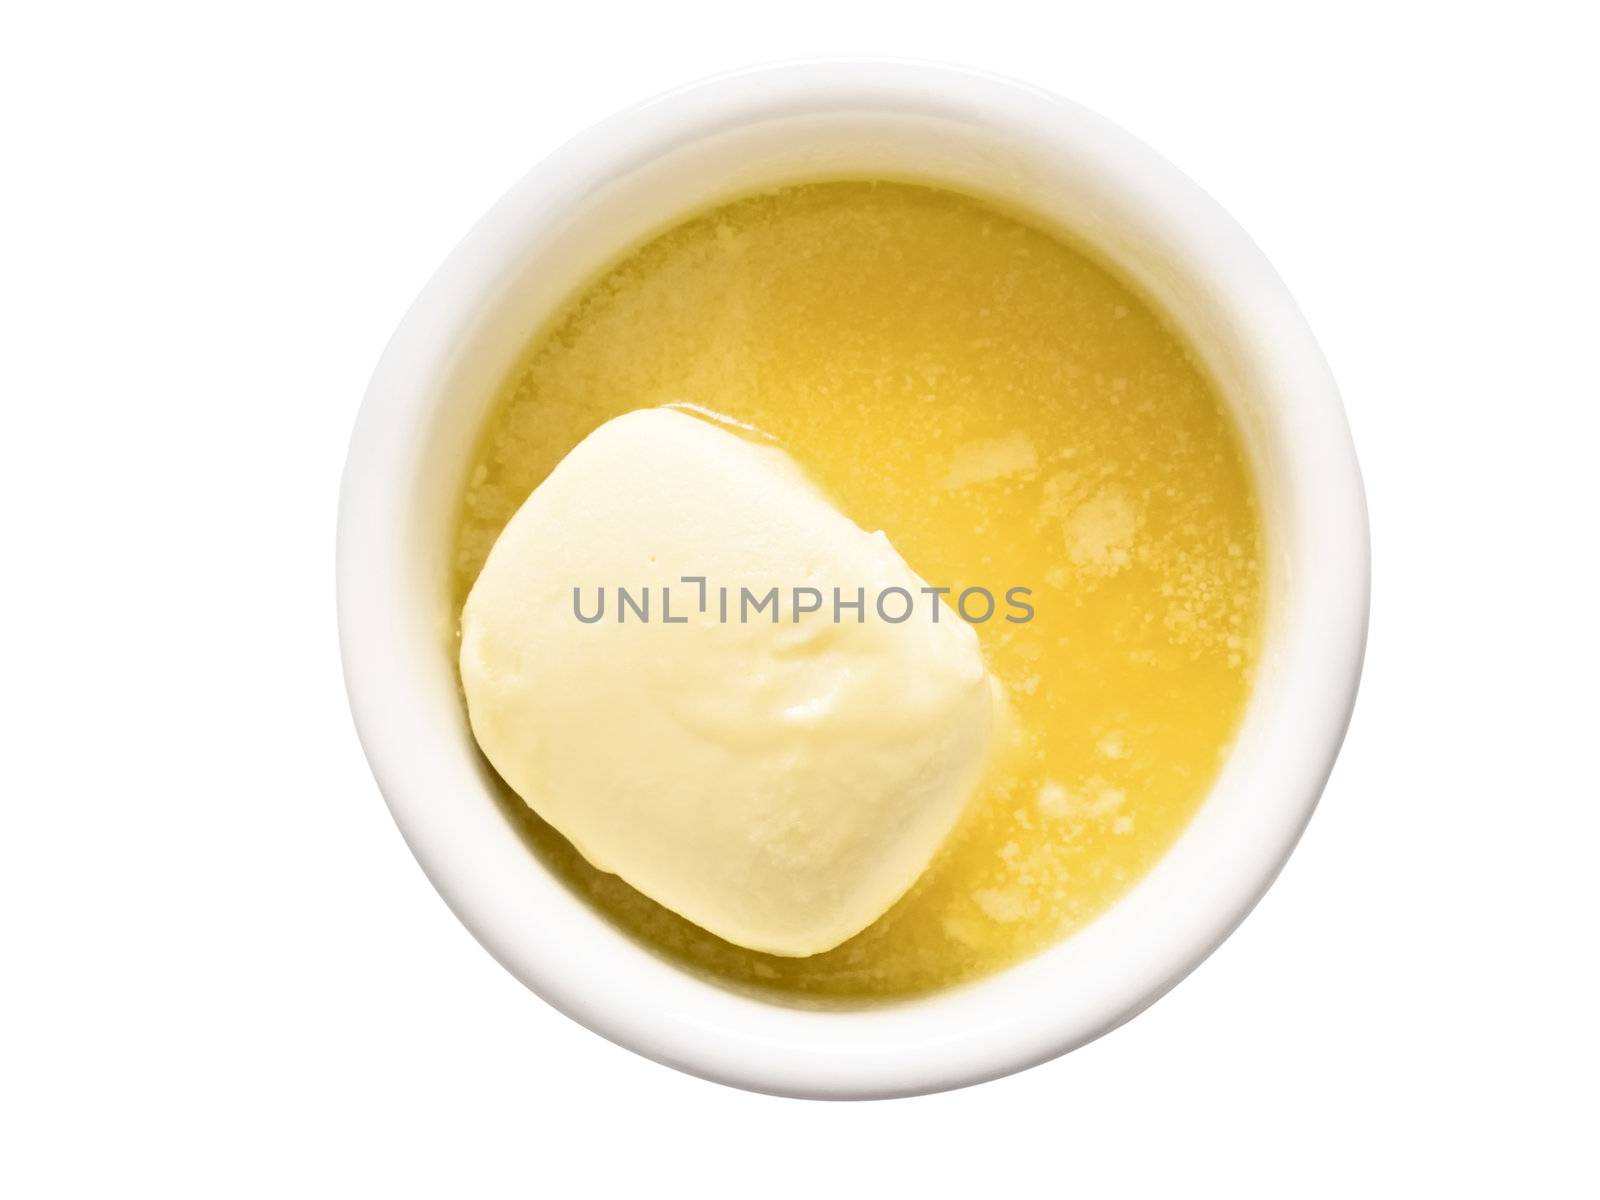 close up of a bowl of melted butter